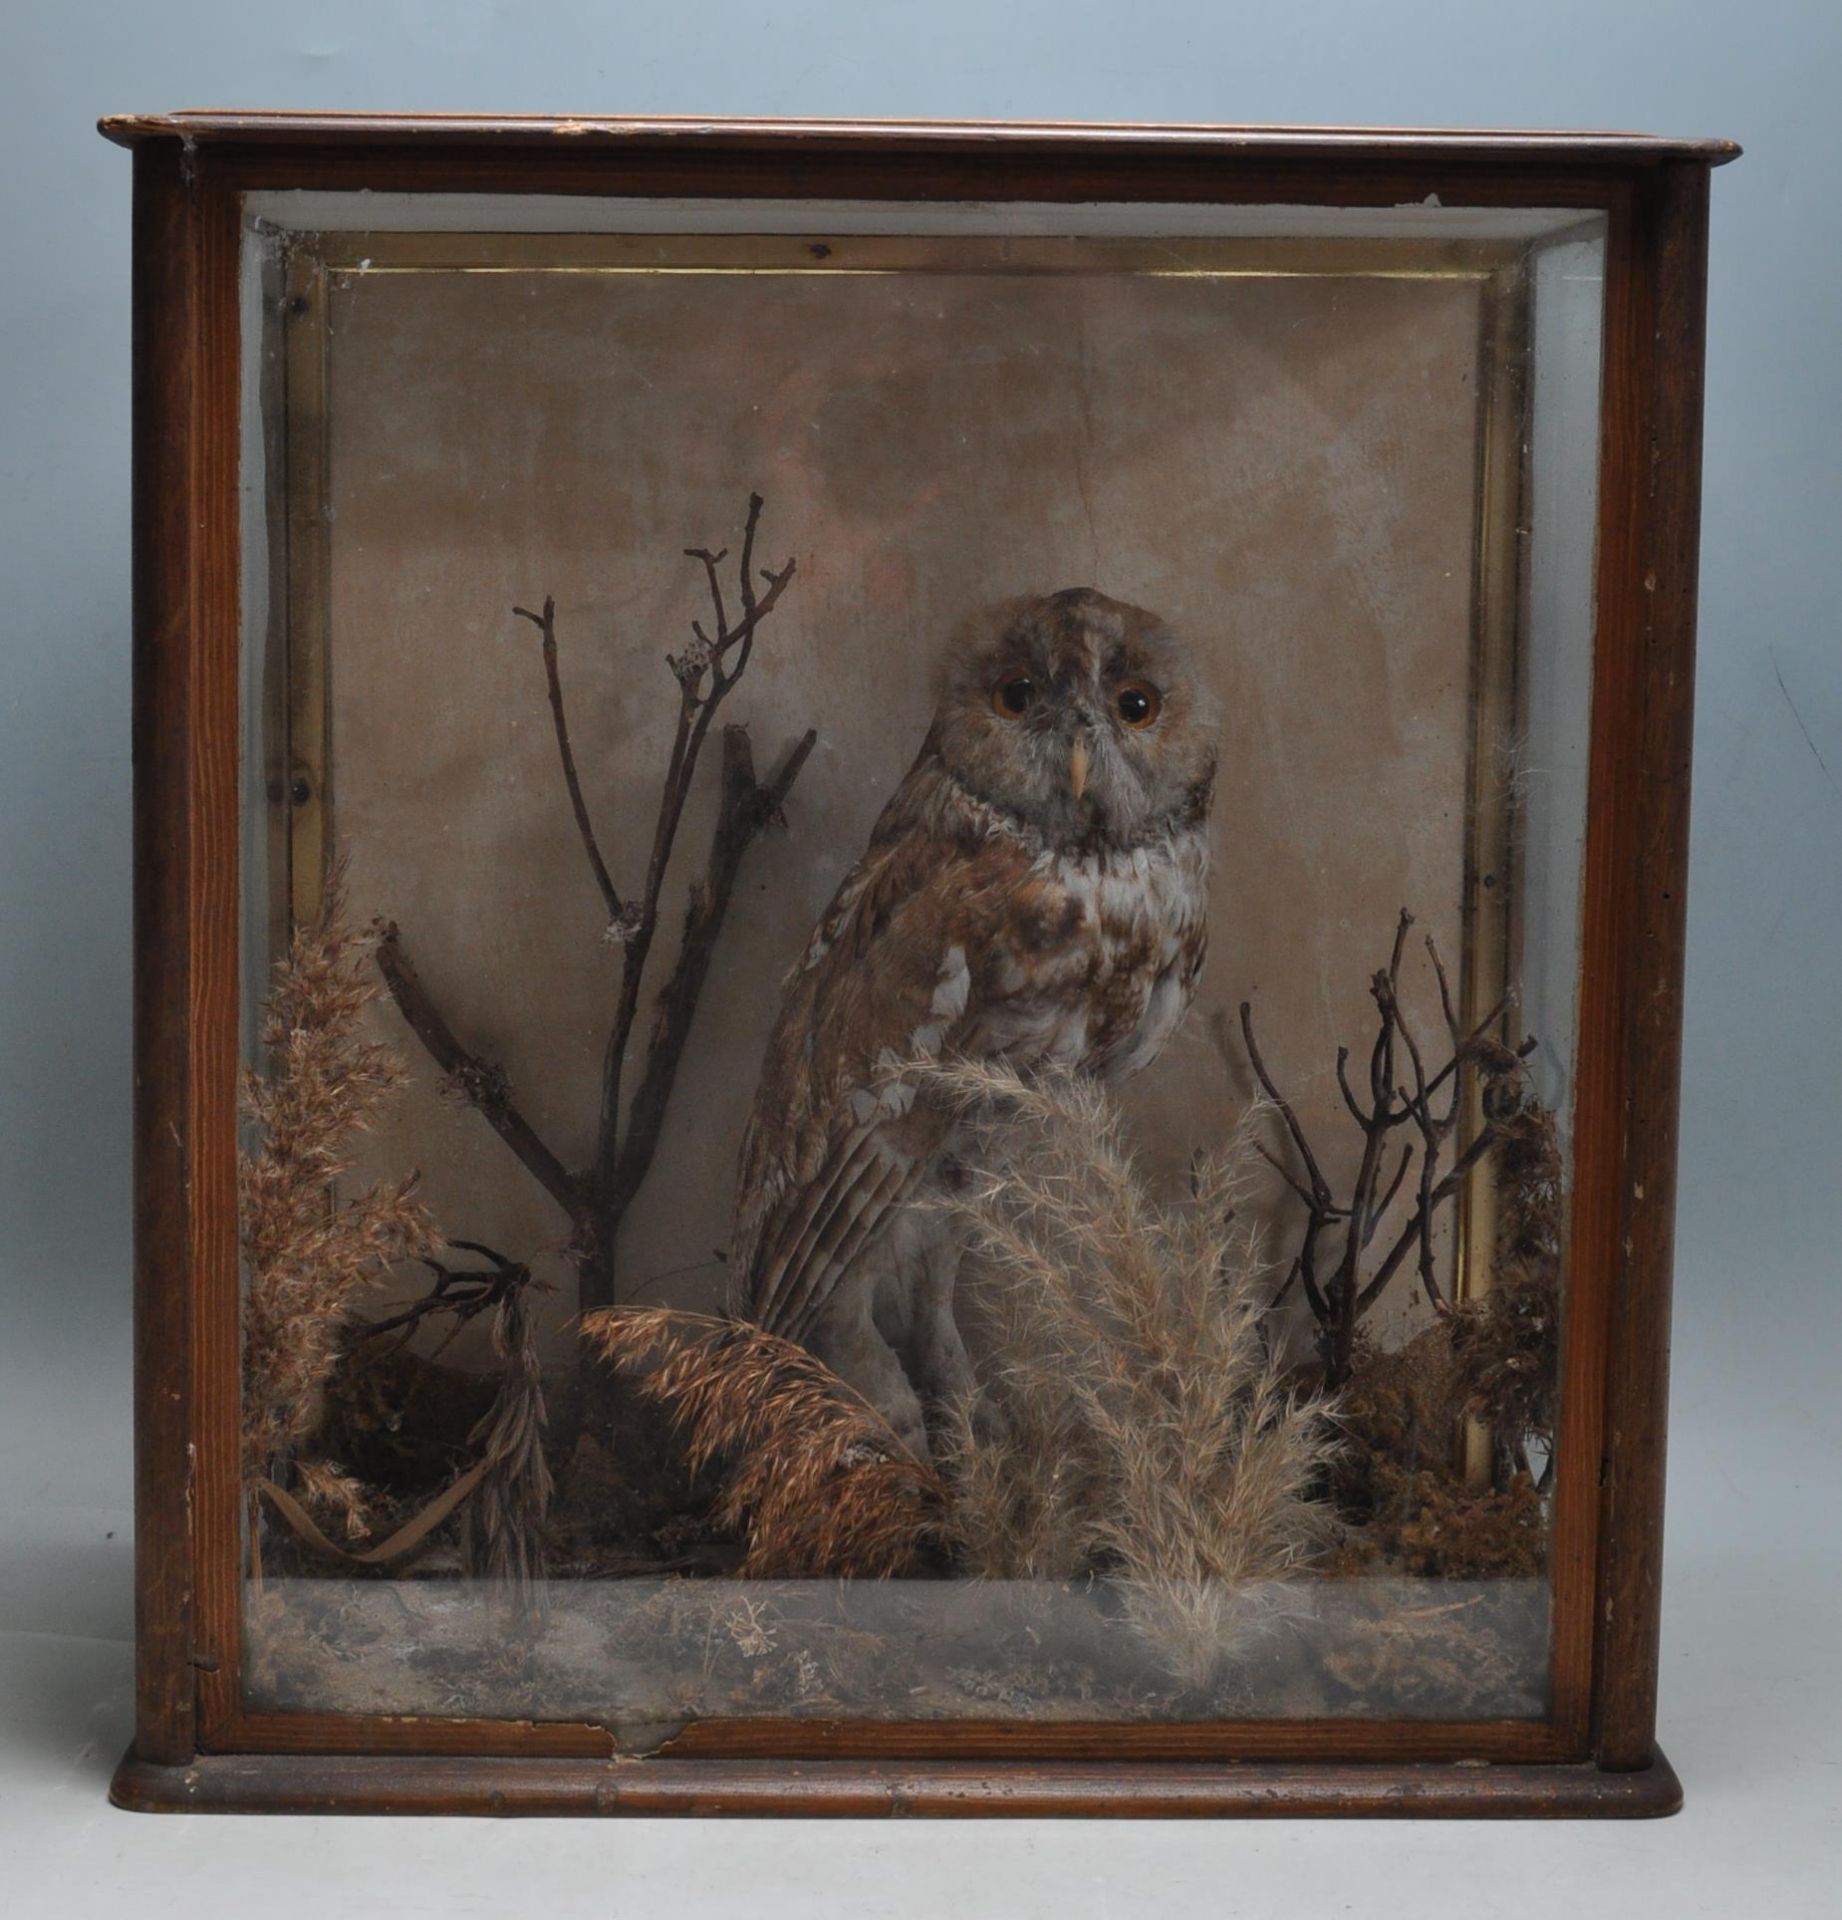 ANTIQUE EARLY 20TH CENTURY TAXIDERMY TAWNY OWL